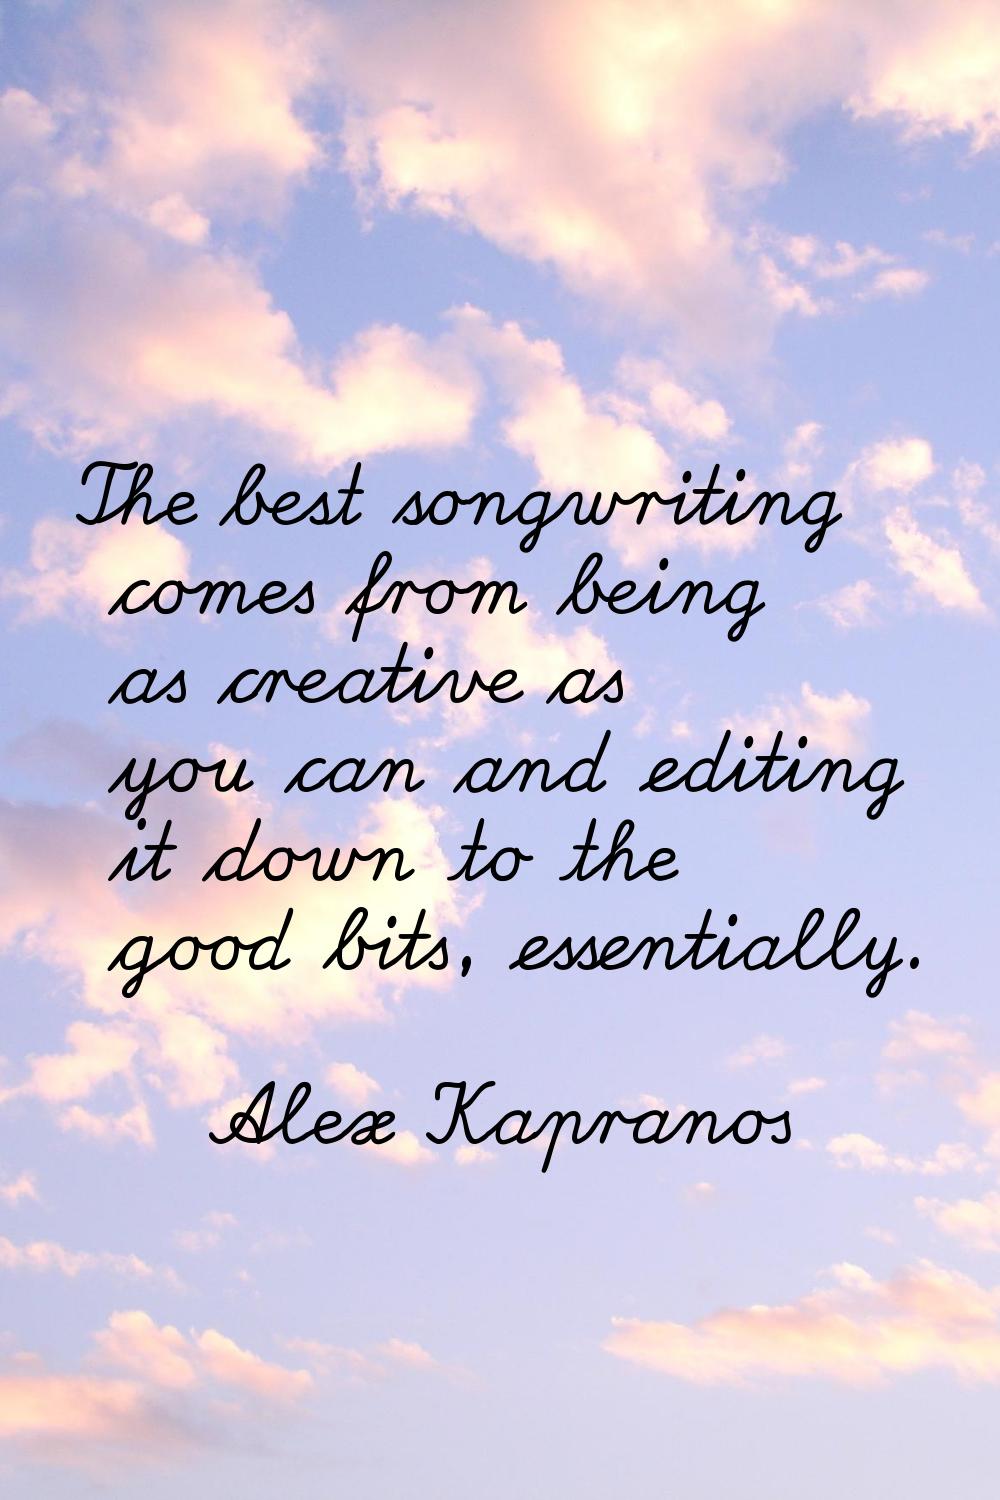 The best songwriting comes from being as creative as you can and editing it down to the good bits, 